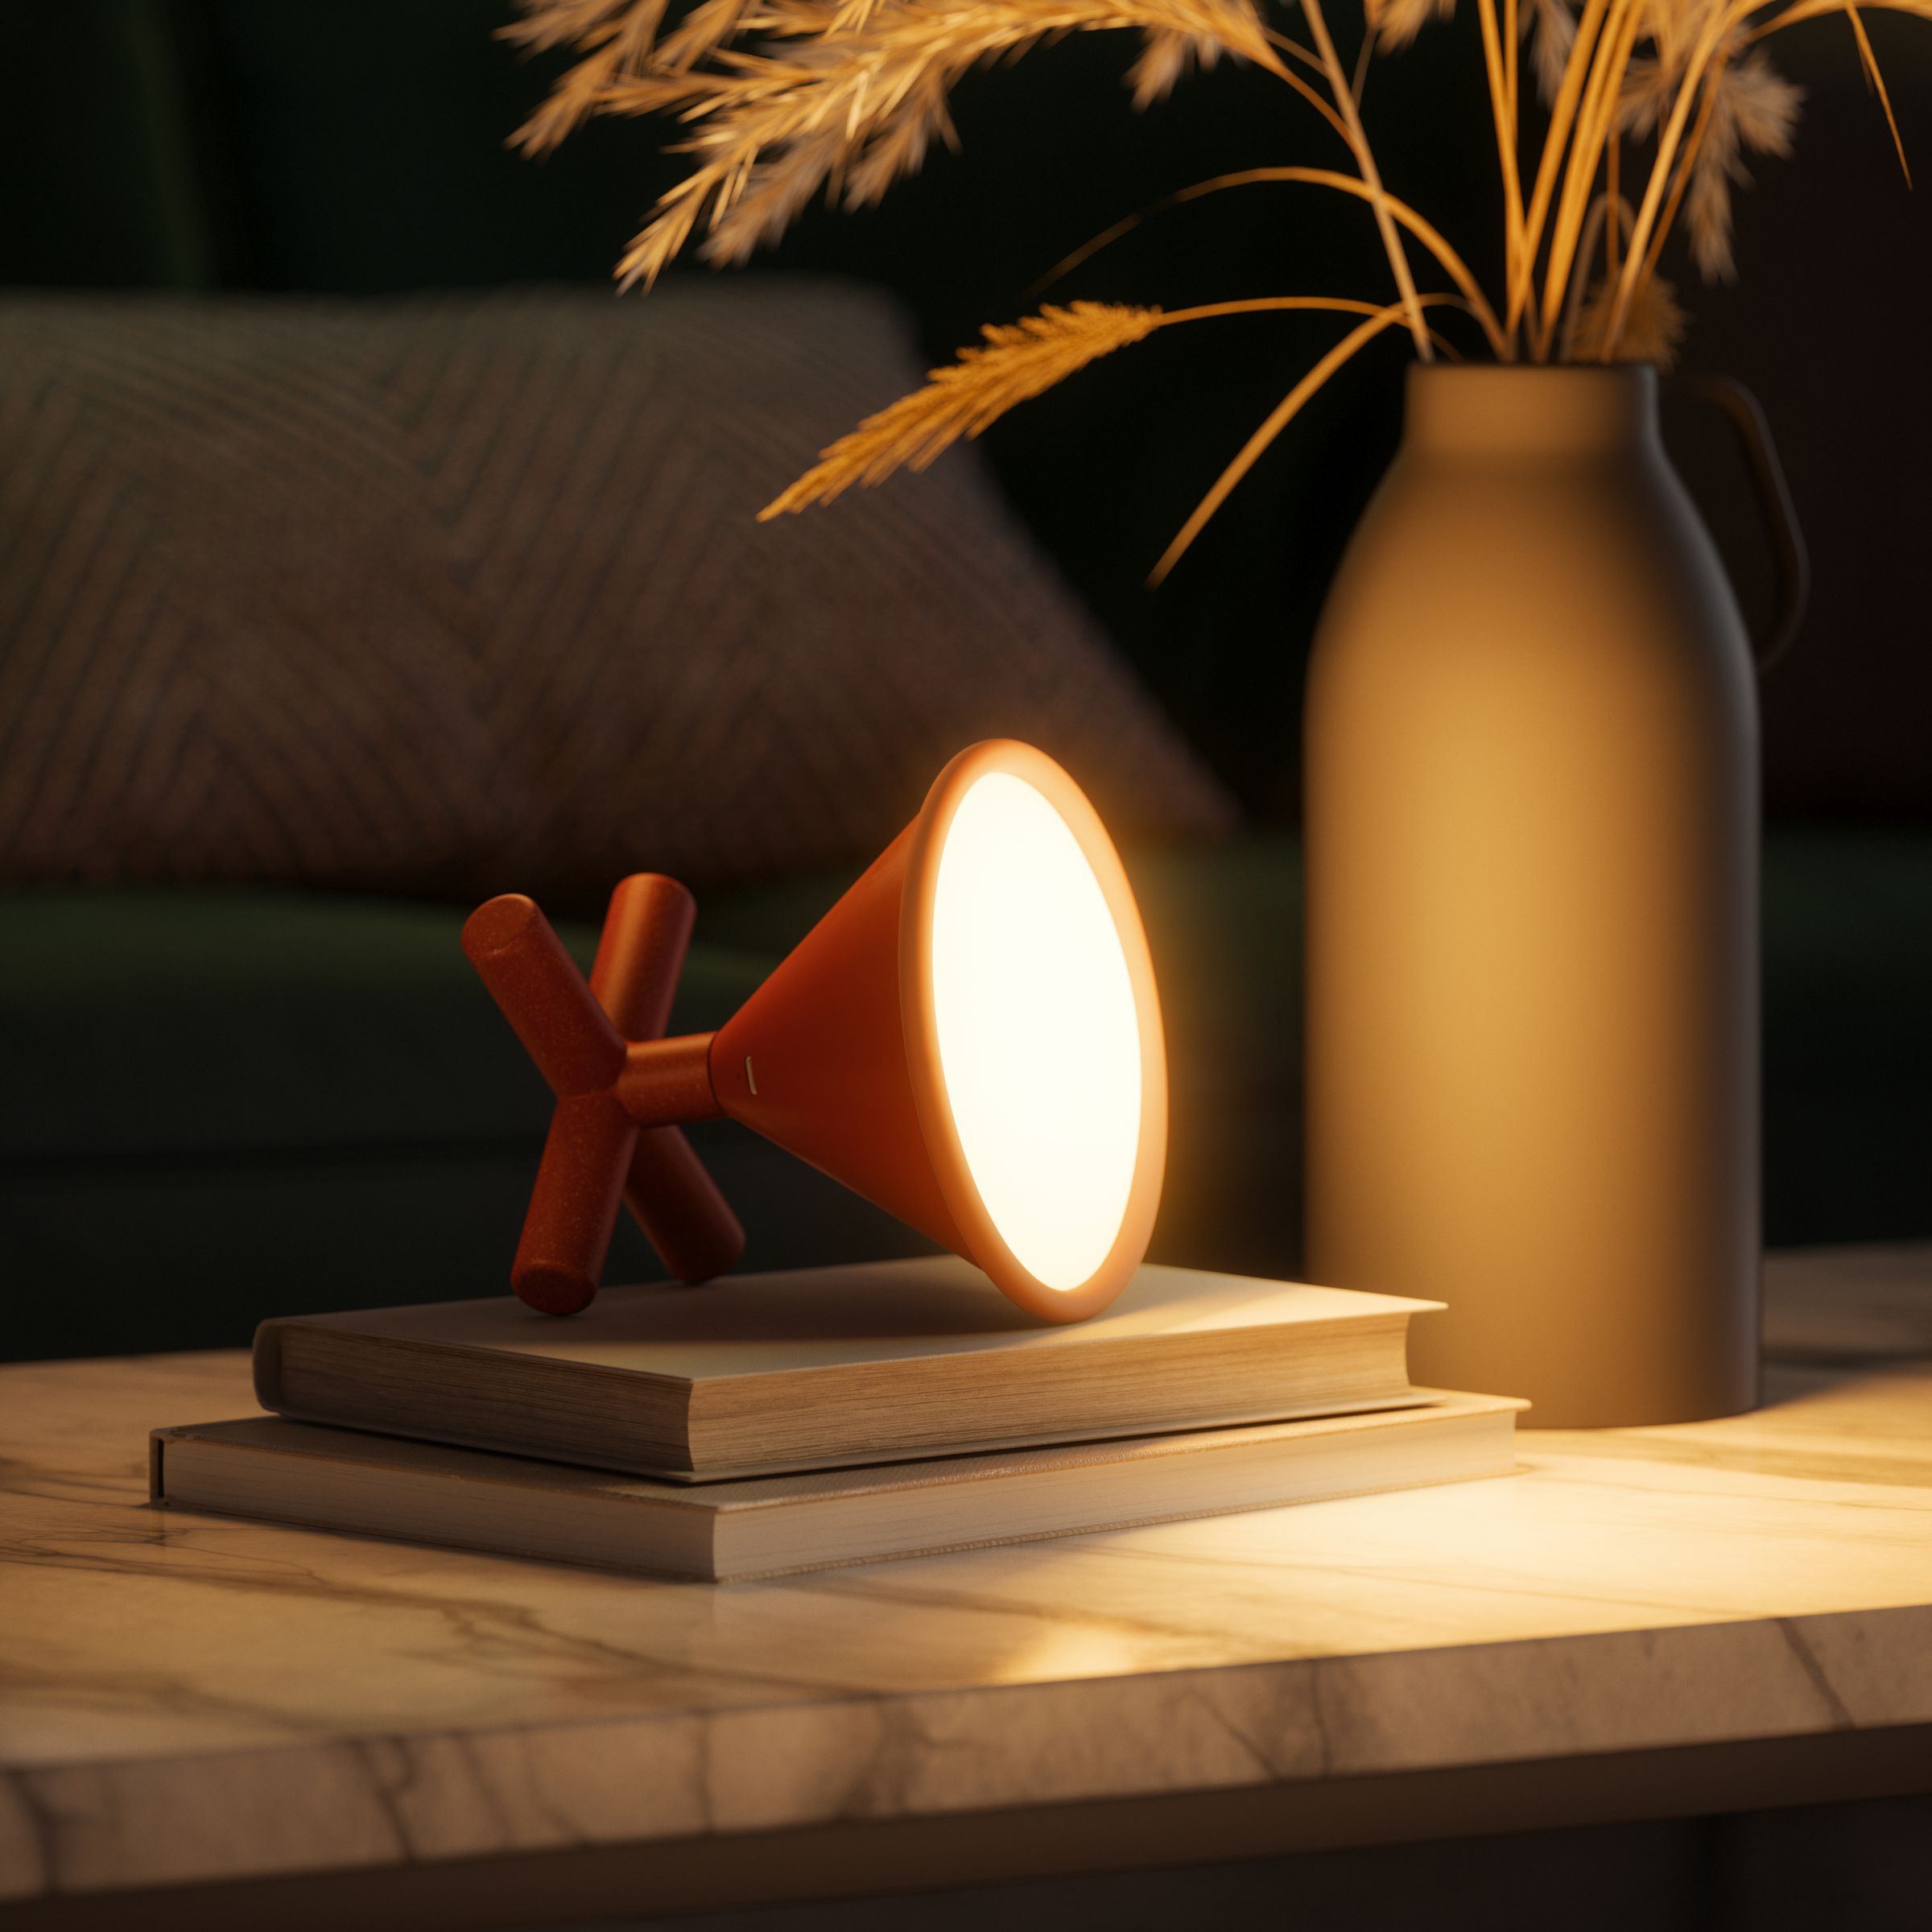 There are lots of Matter-compatible smart bulbs, switches and lamps available now and coming soon — including this Nanoleaf x Umbra Cono lamp.